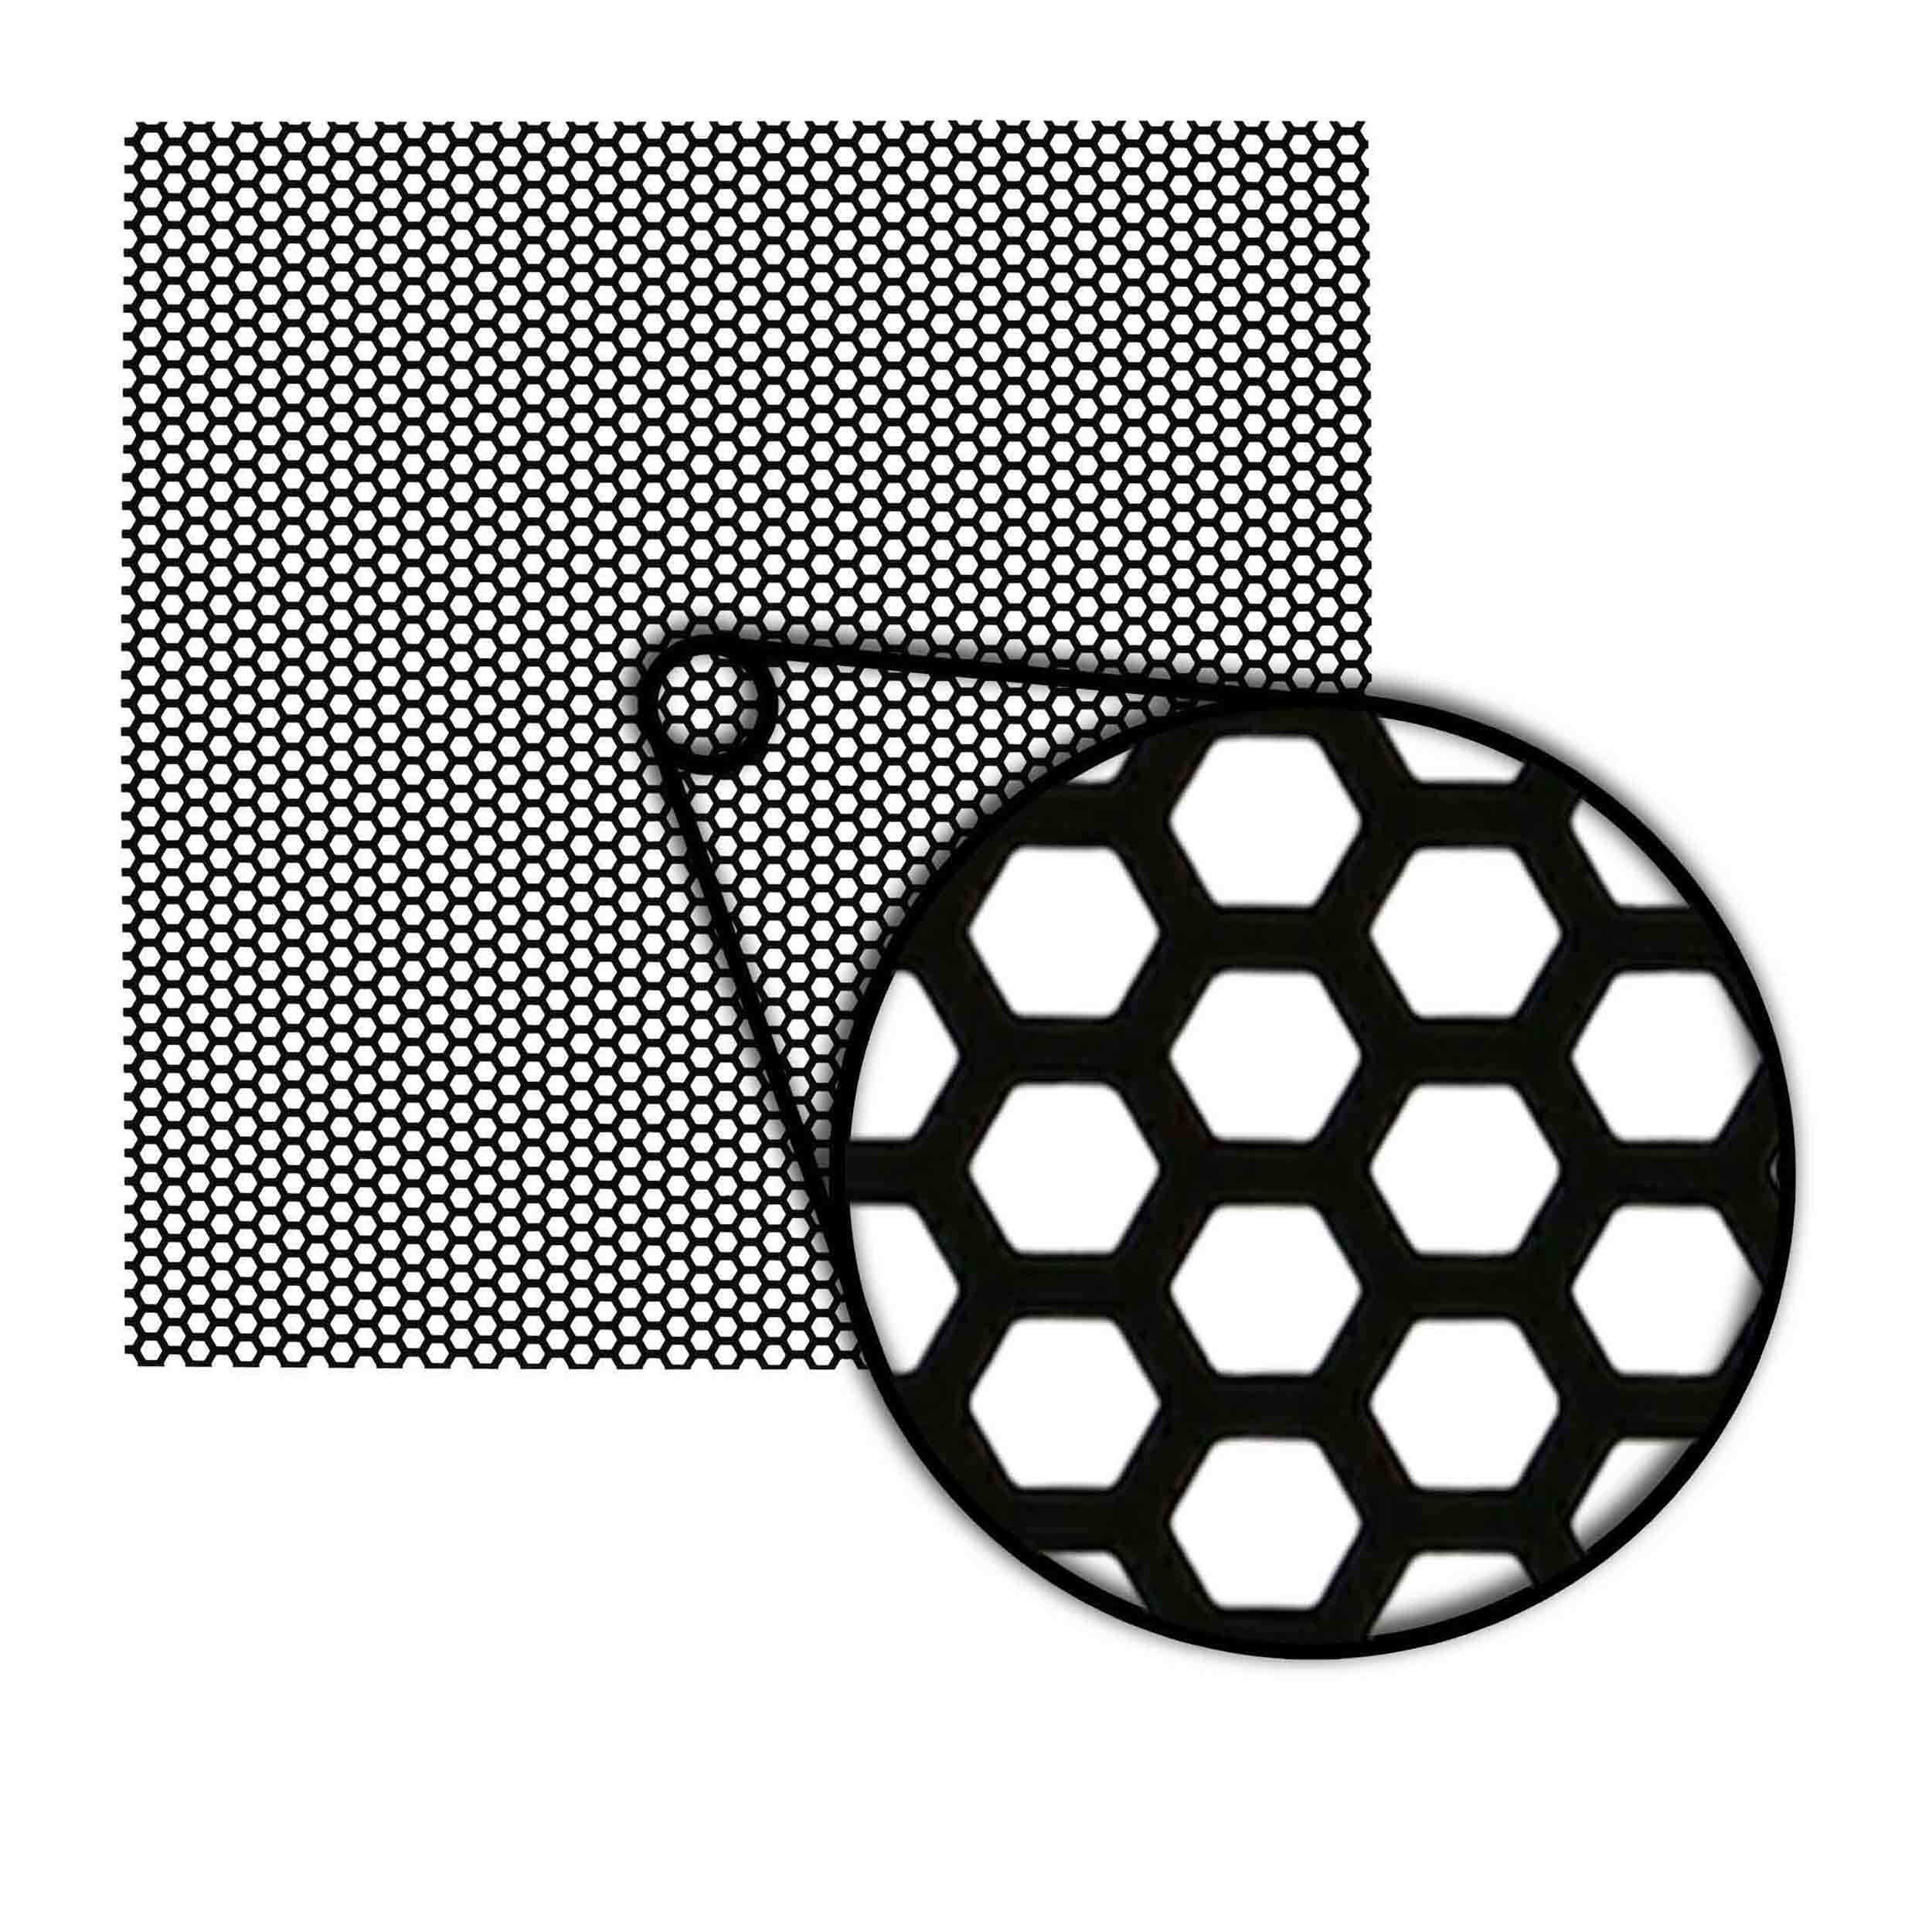 Metal Mesh Grille Material - Honeycomb Hex Pattern, 20-Pack